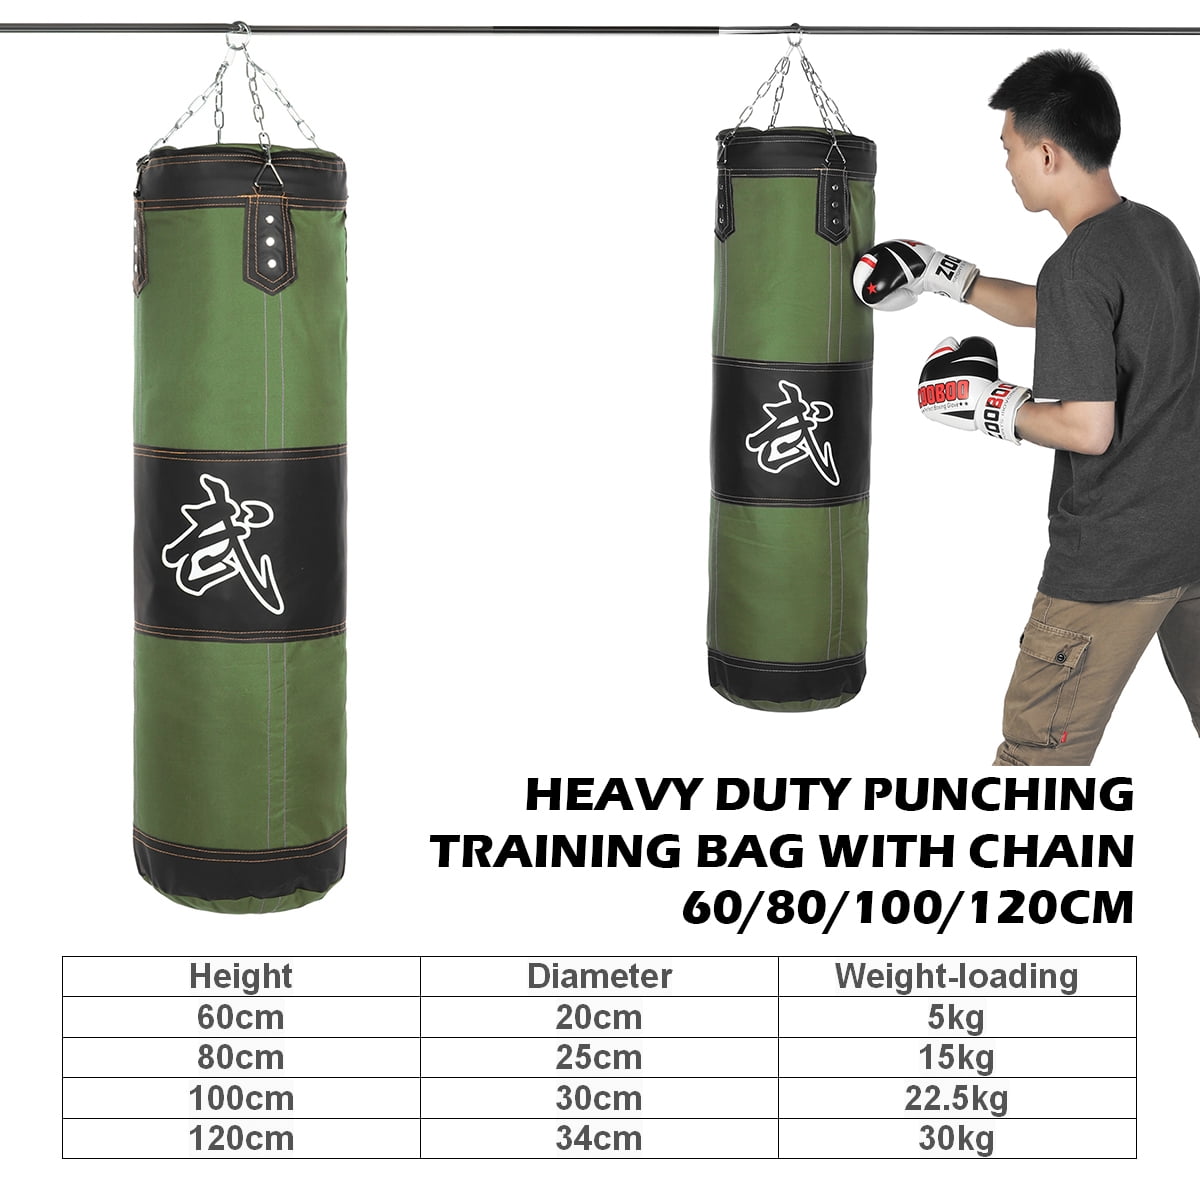 Hanging a Punching Bag : 9 Steps - Instructables